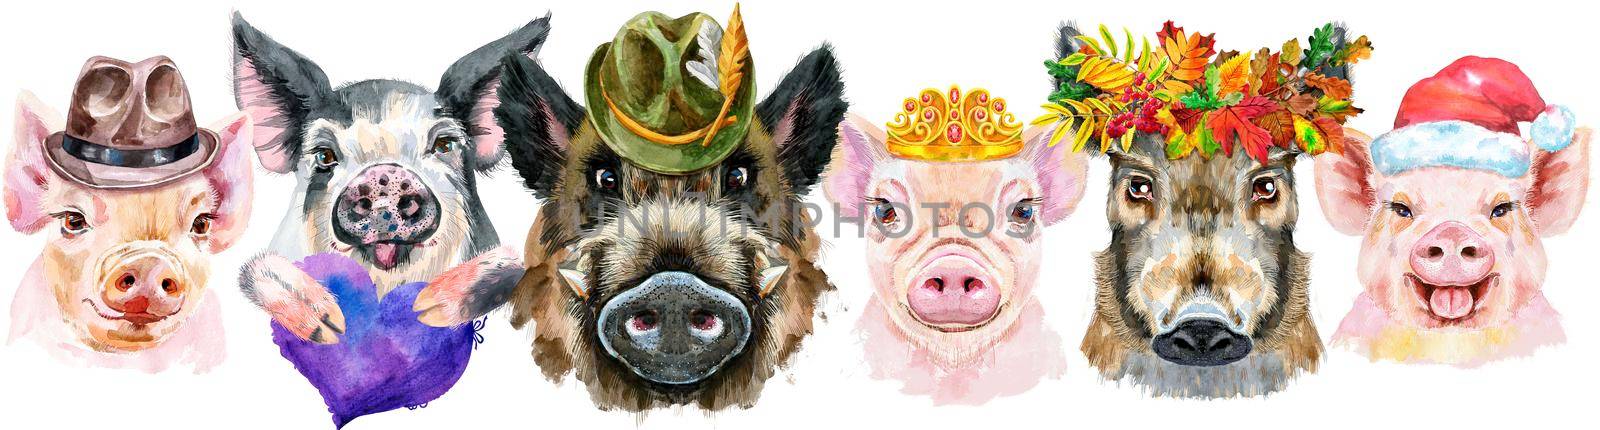 Cute border from watercolor portraits of pigs. Watercolor illustration of pigs in wreath of autumn leaves, hats, Santa hats, golden crown, with violet heart